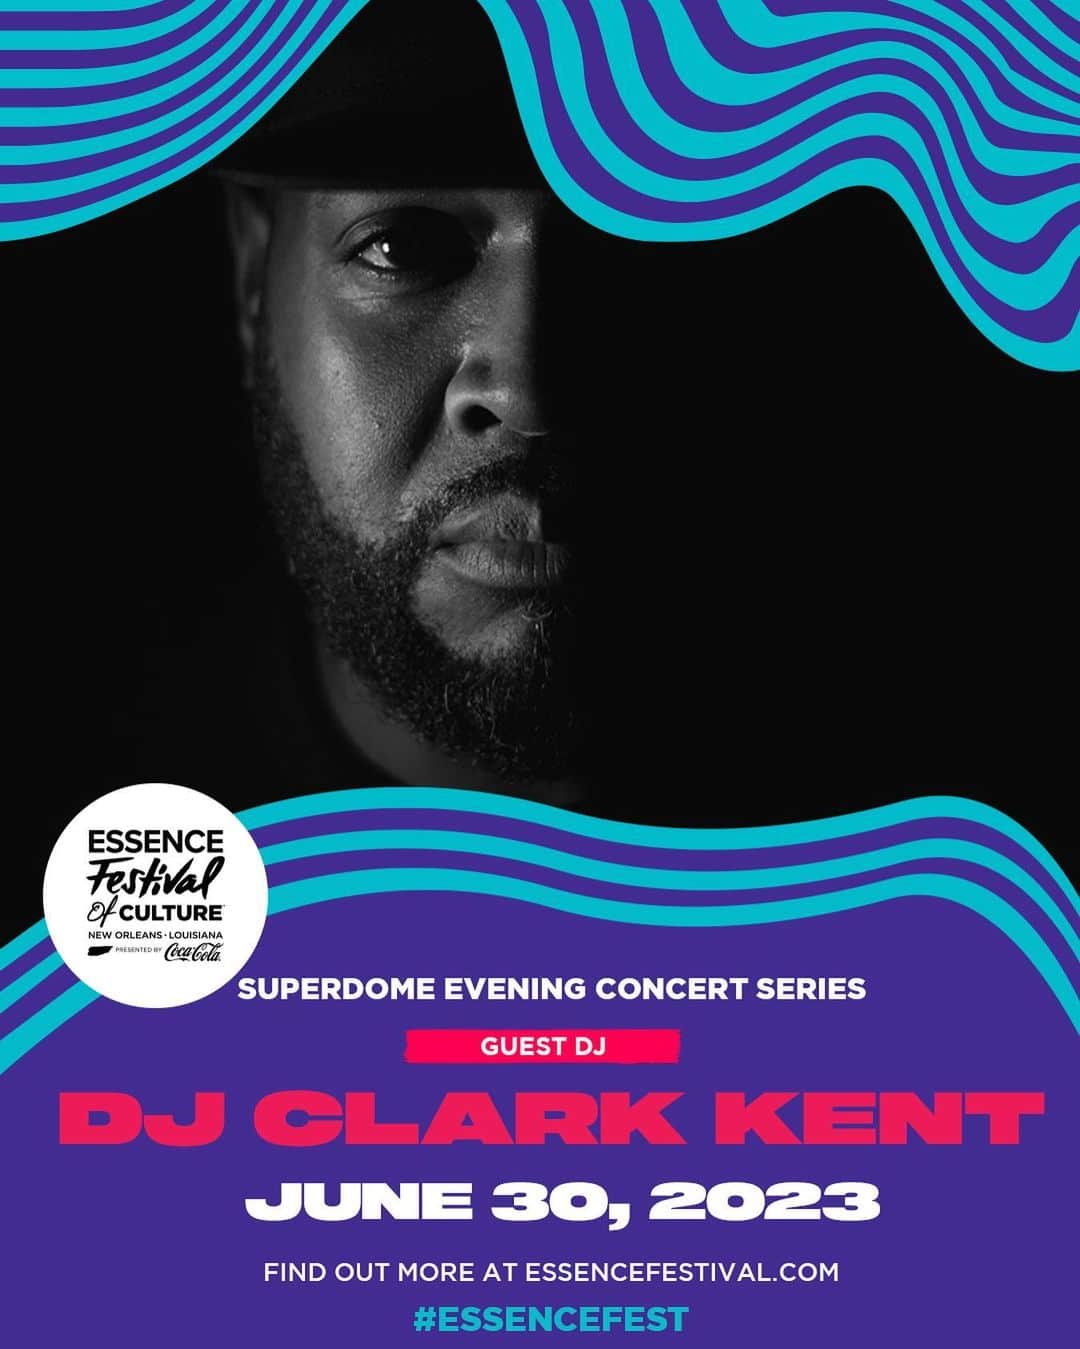 DJ Clark Kentのインスタグラム：「I will be at the 2023 Essence Festival of Culture at the Caesars Superdome in New Orleans. I'm curating a tribute to hip hop during my DJ set! You do not want to miss the all-star salute to 50 years of Hip-Hop. Get your tickets at Ticketmaster.com right now. See you in Nola! #EssenceFest」